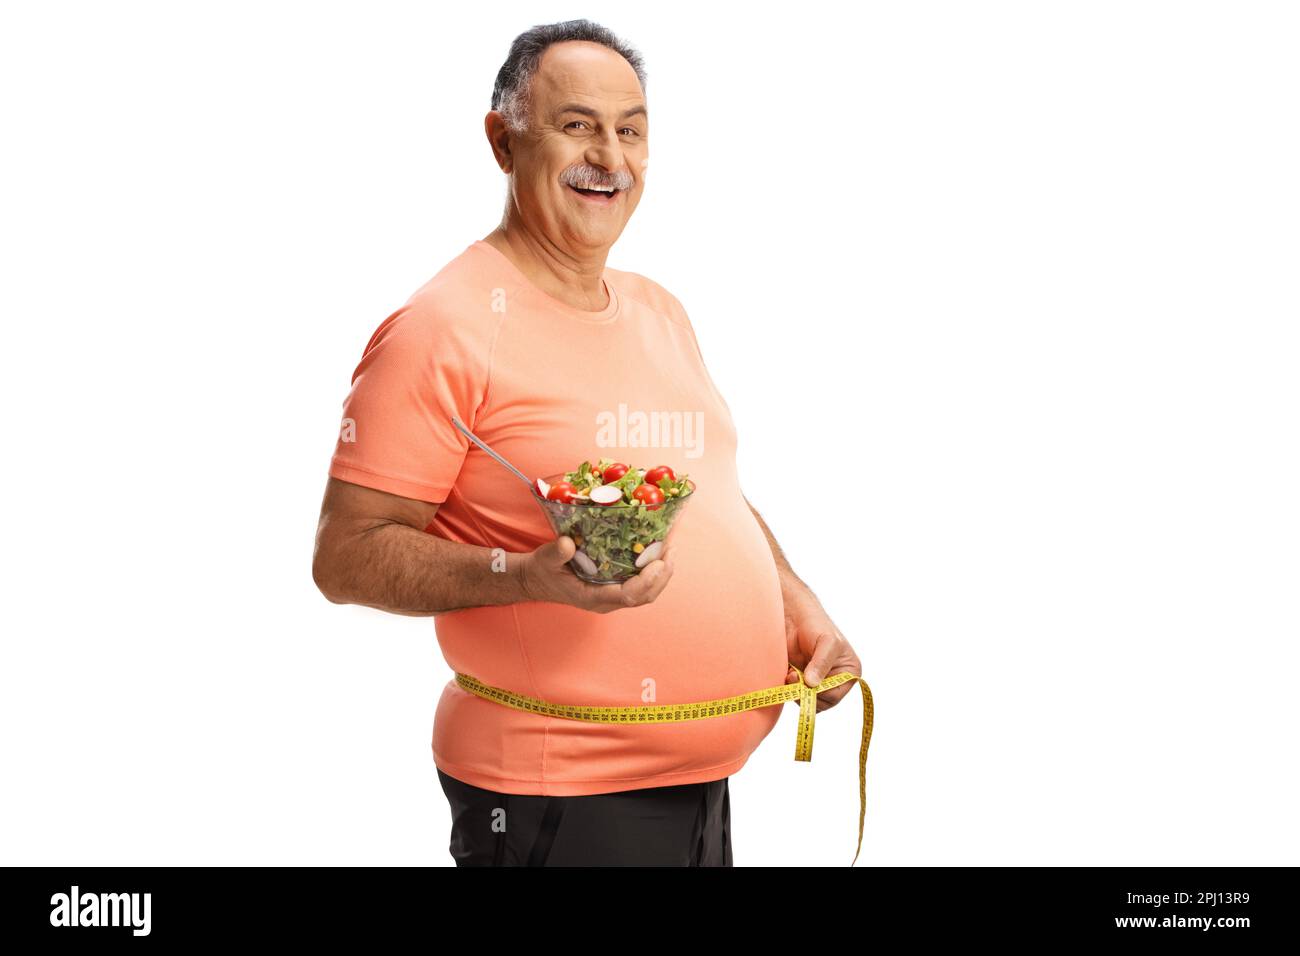 Mature man in sportswear holding a salad and measuring waist isolated on white background Stock Photo